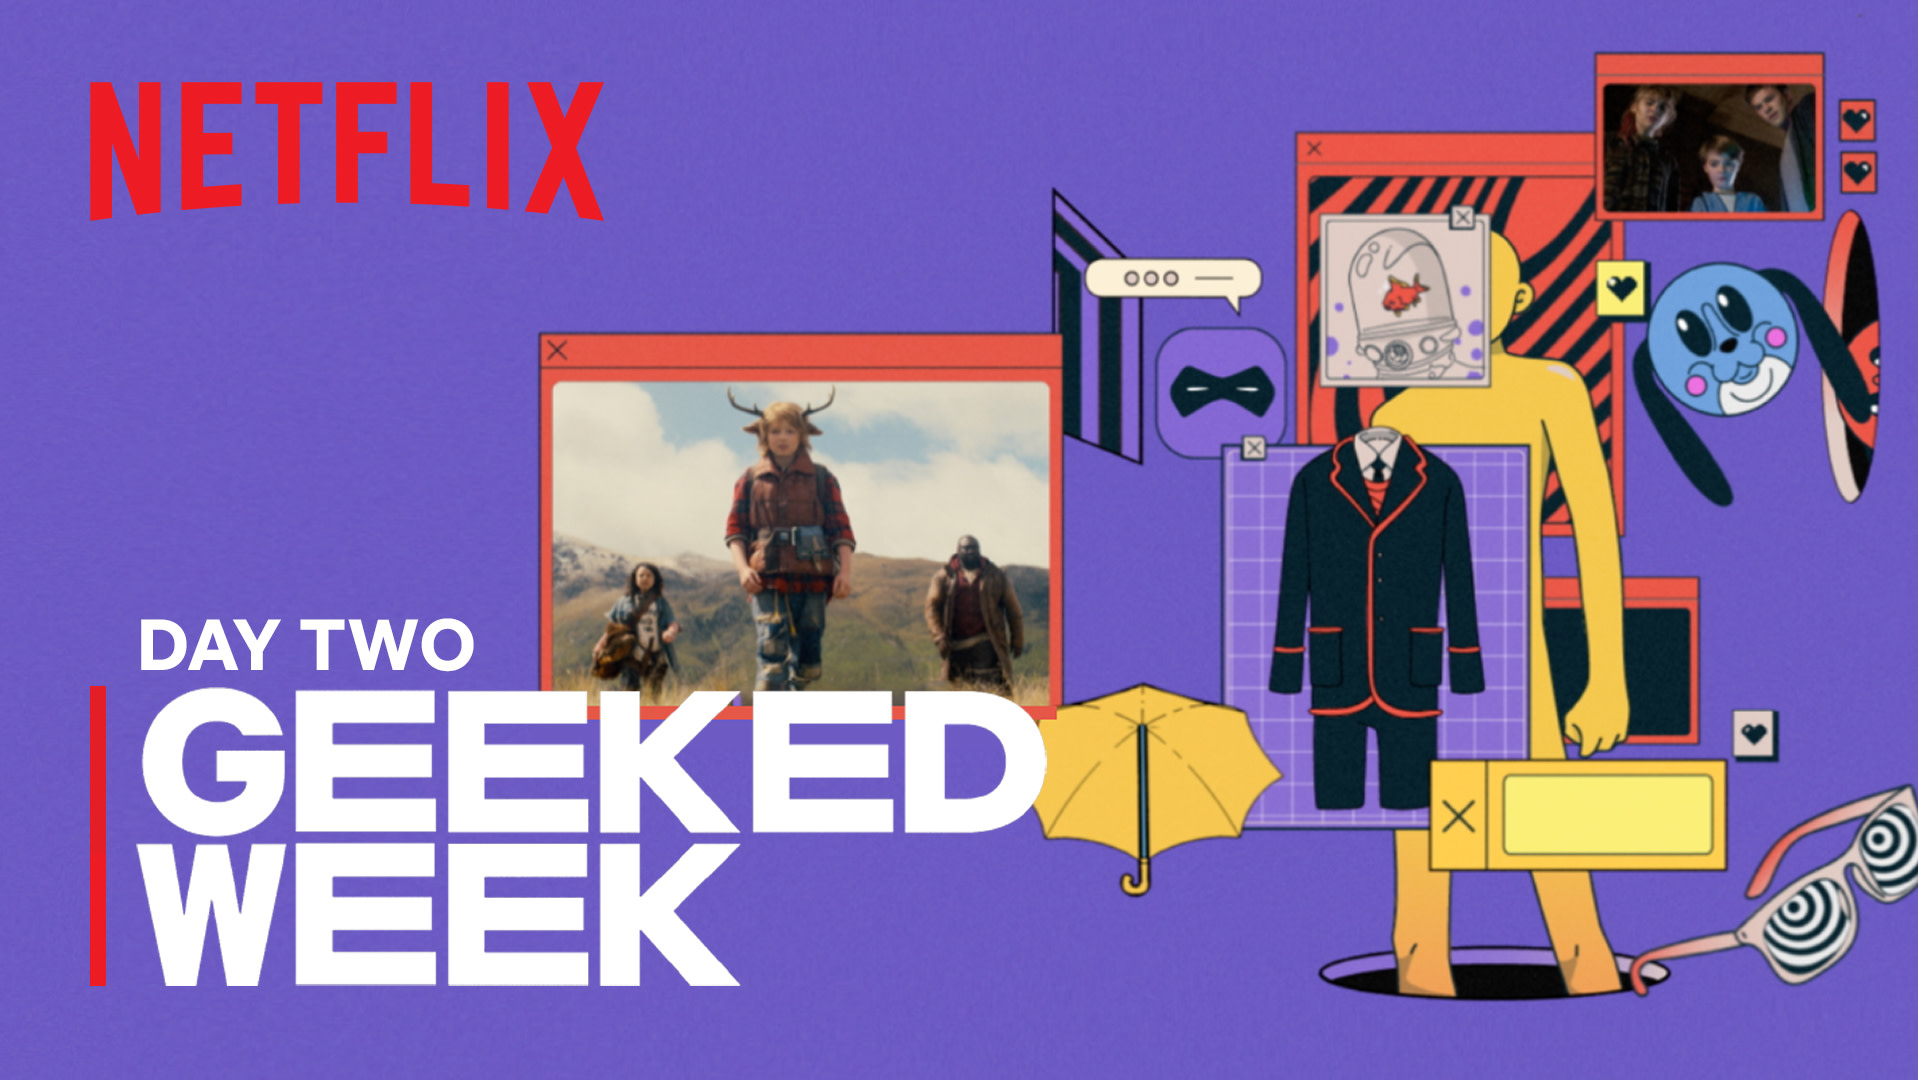 Geeked Week 2021 Recap: All the News and Sneak Peeks From Day 2